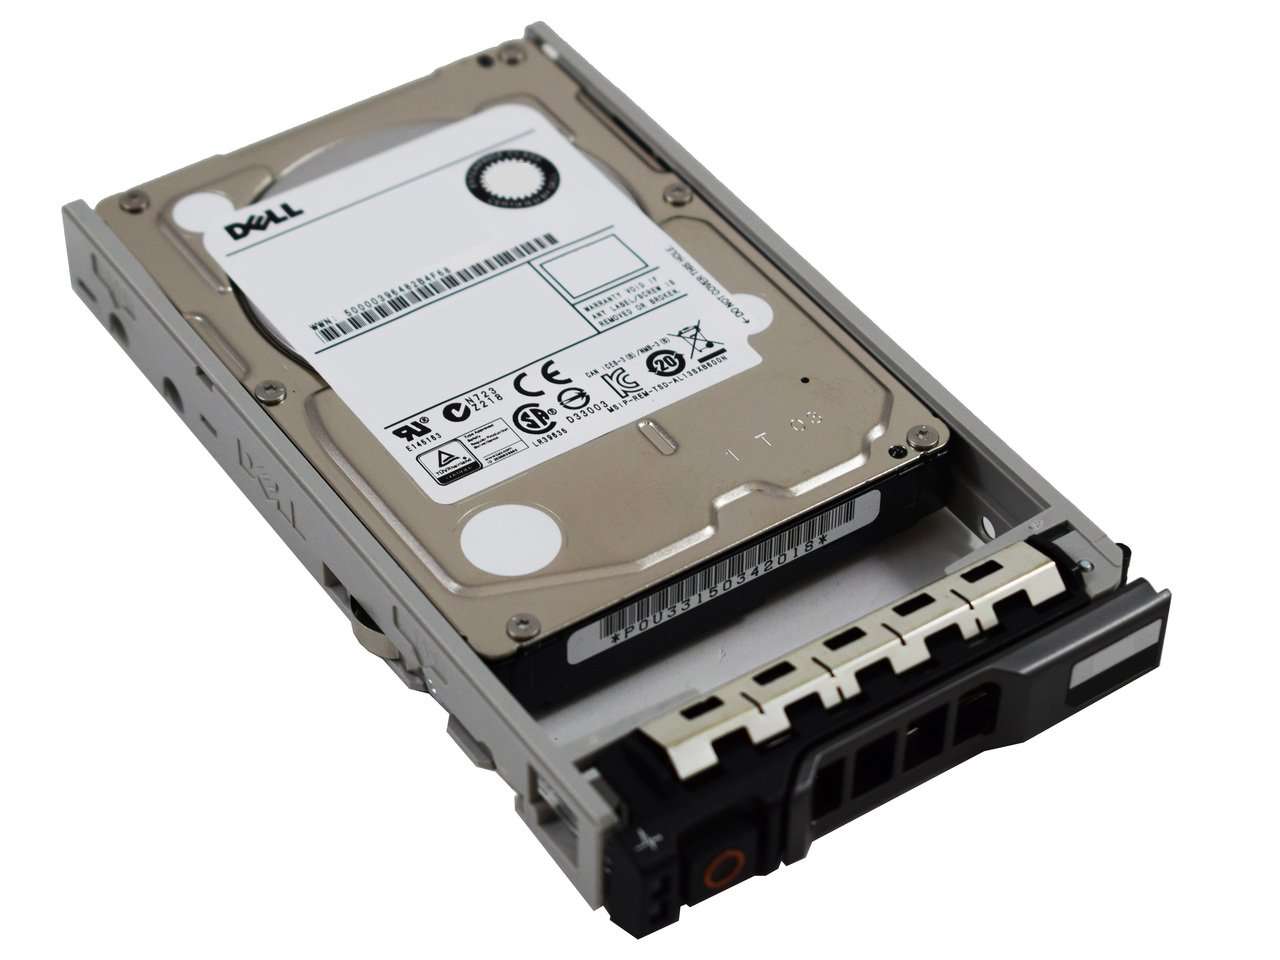 Dell G13 463-1660 600GB 15K RPM SAS 6Gb/s 512n 2.5" Manufacturer Recertified HDD